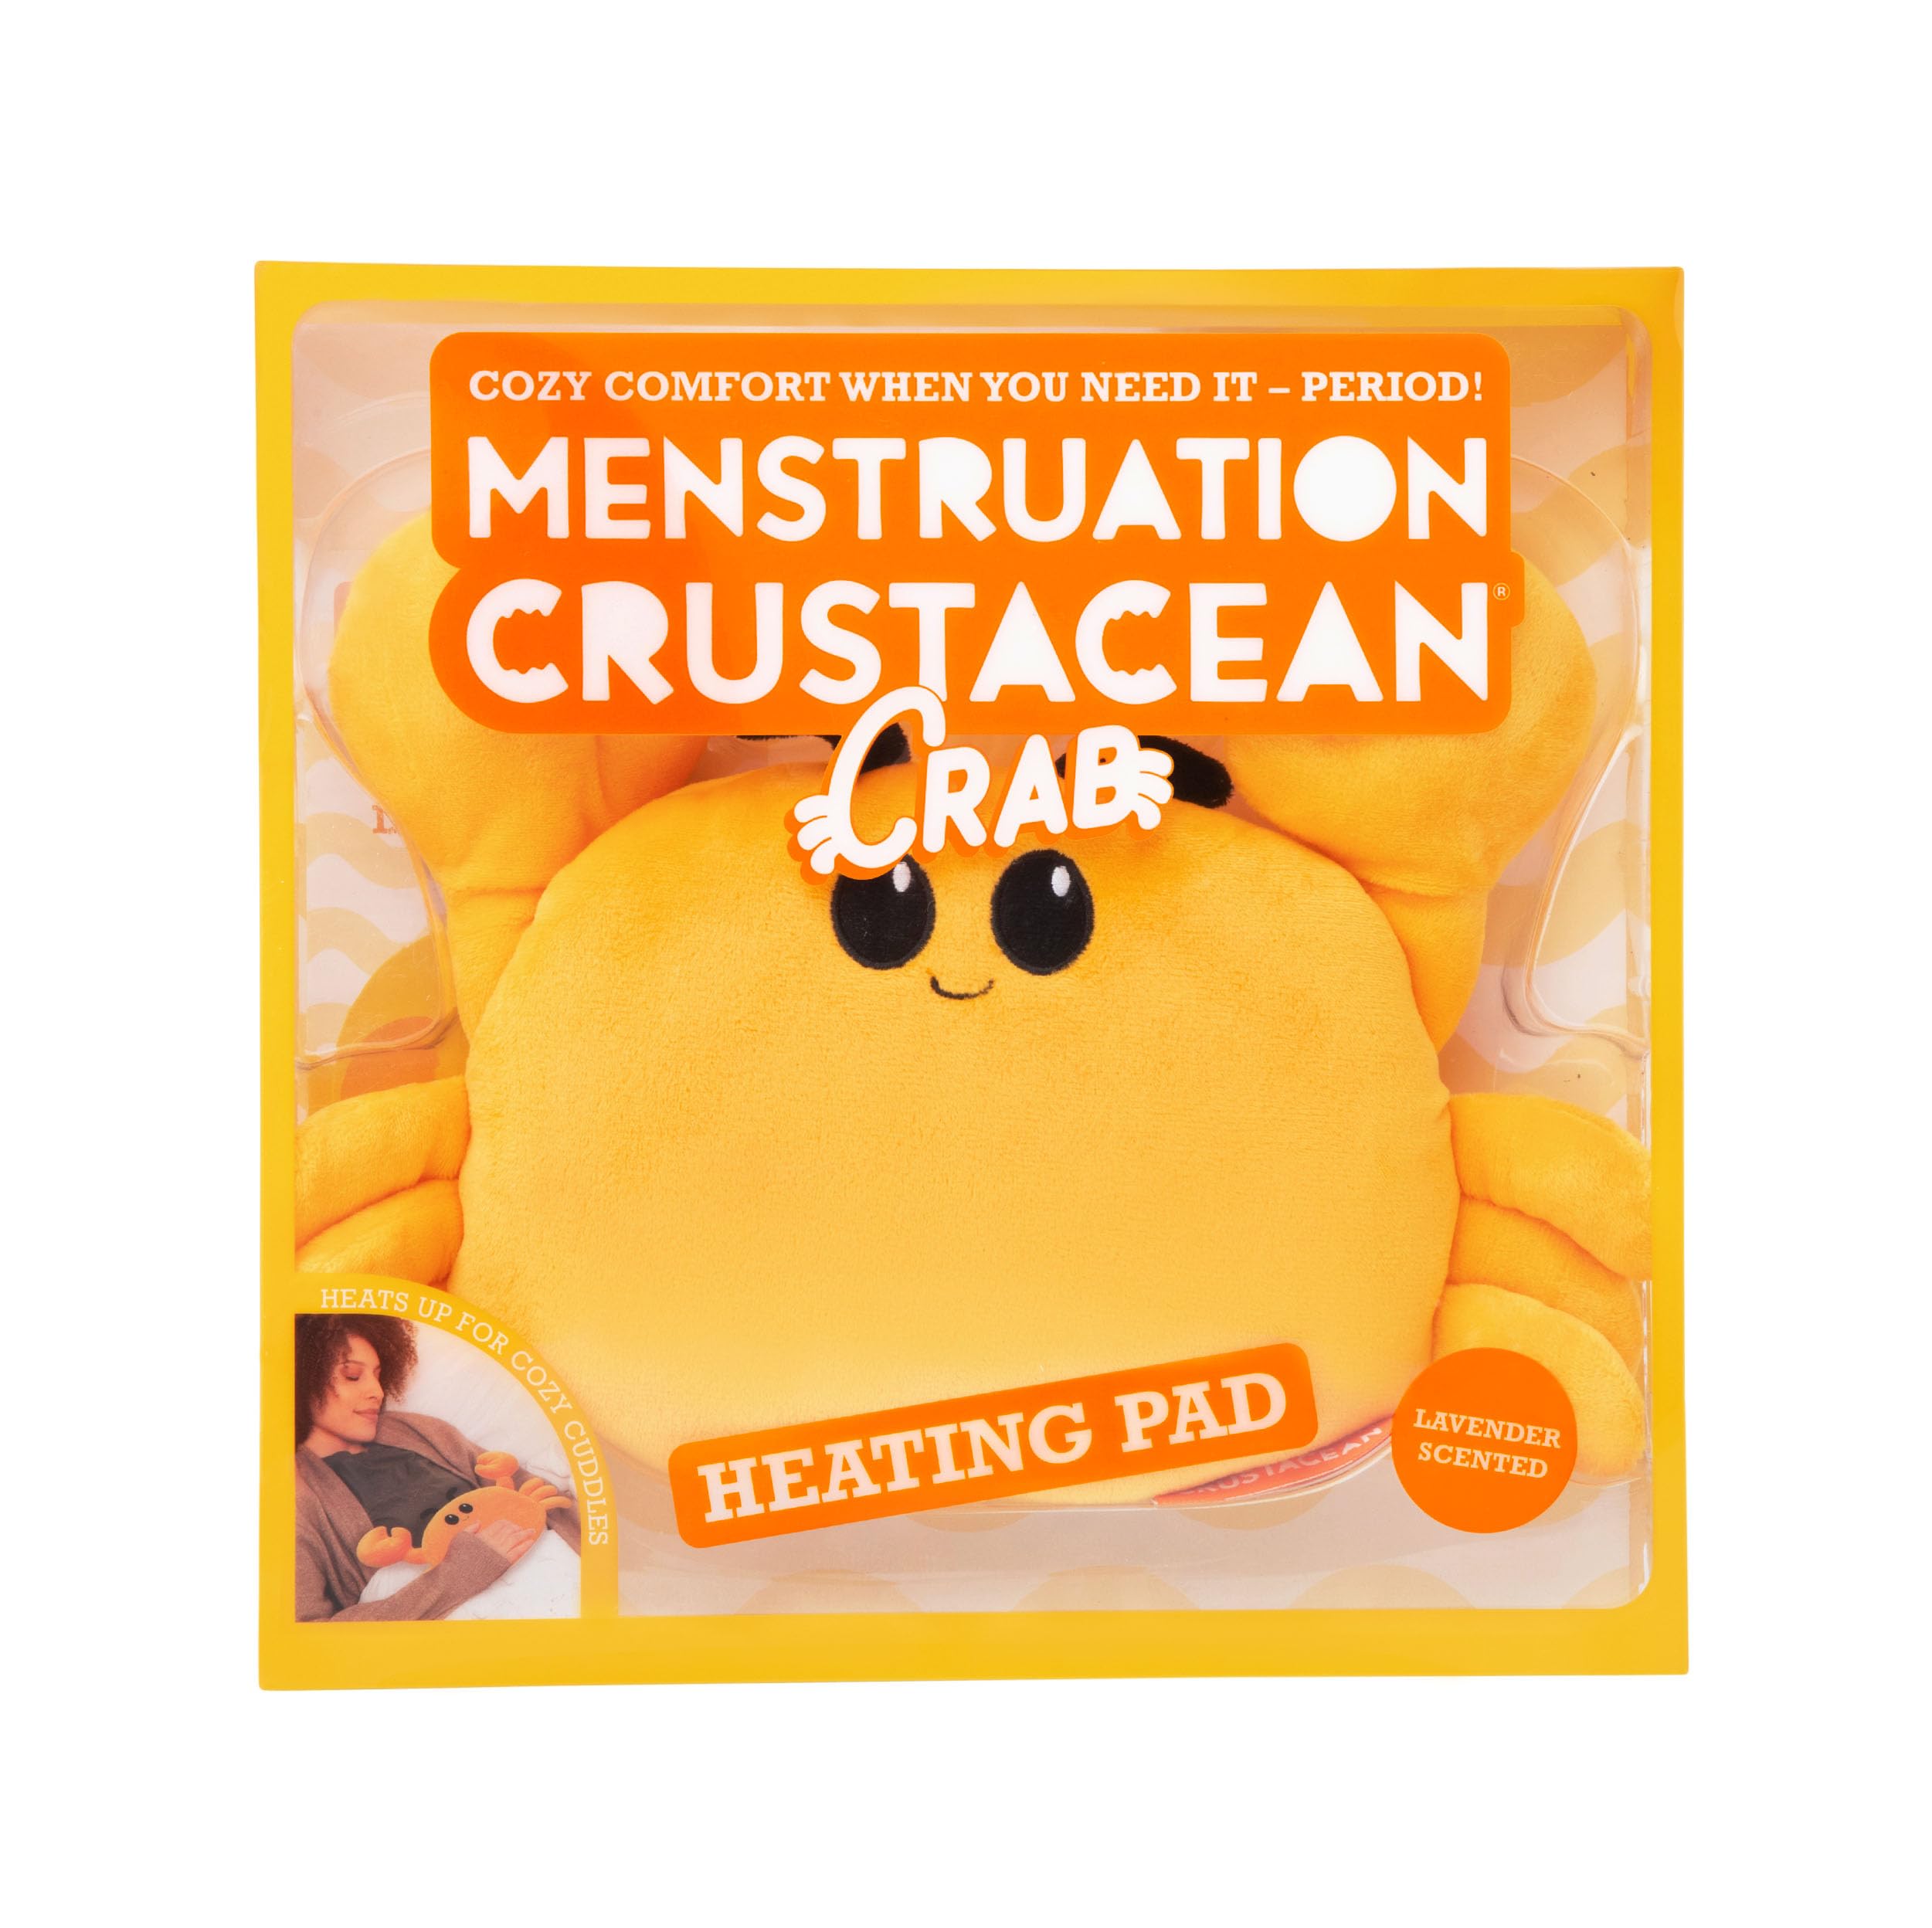 Menstruation Crustacean Crab: Microwaveable Heating Pad for Period Cramps & Self Care, Lavender Scented